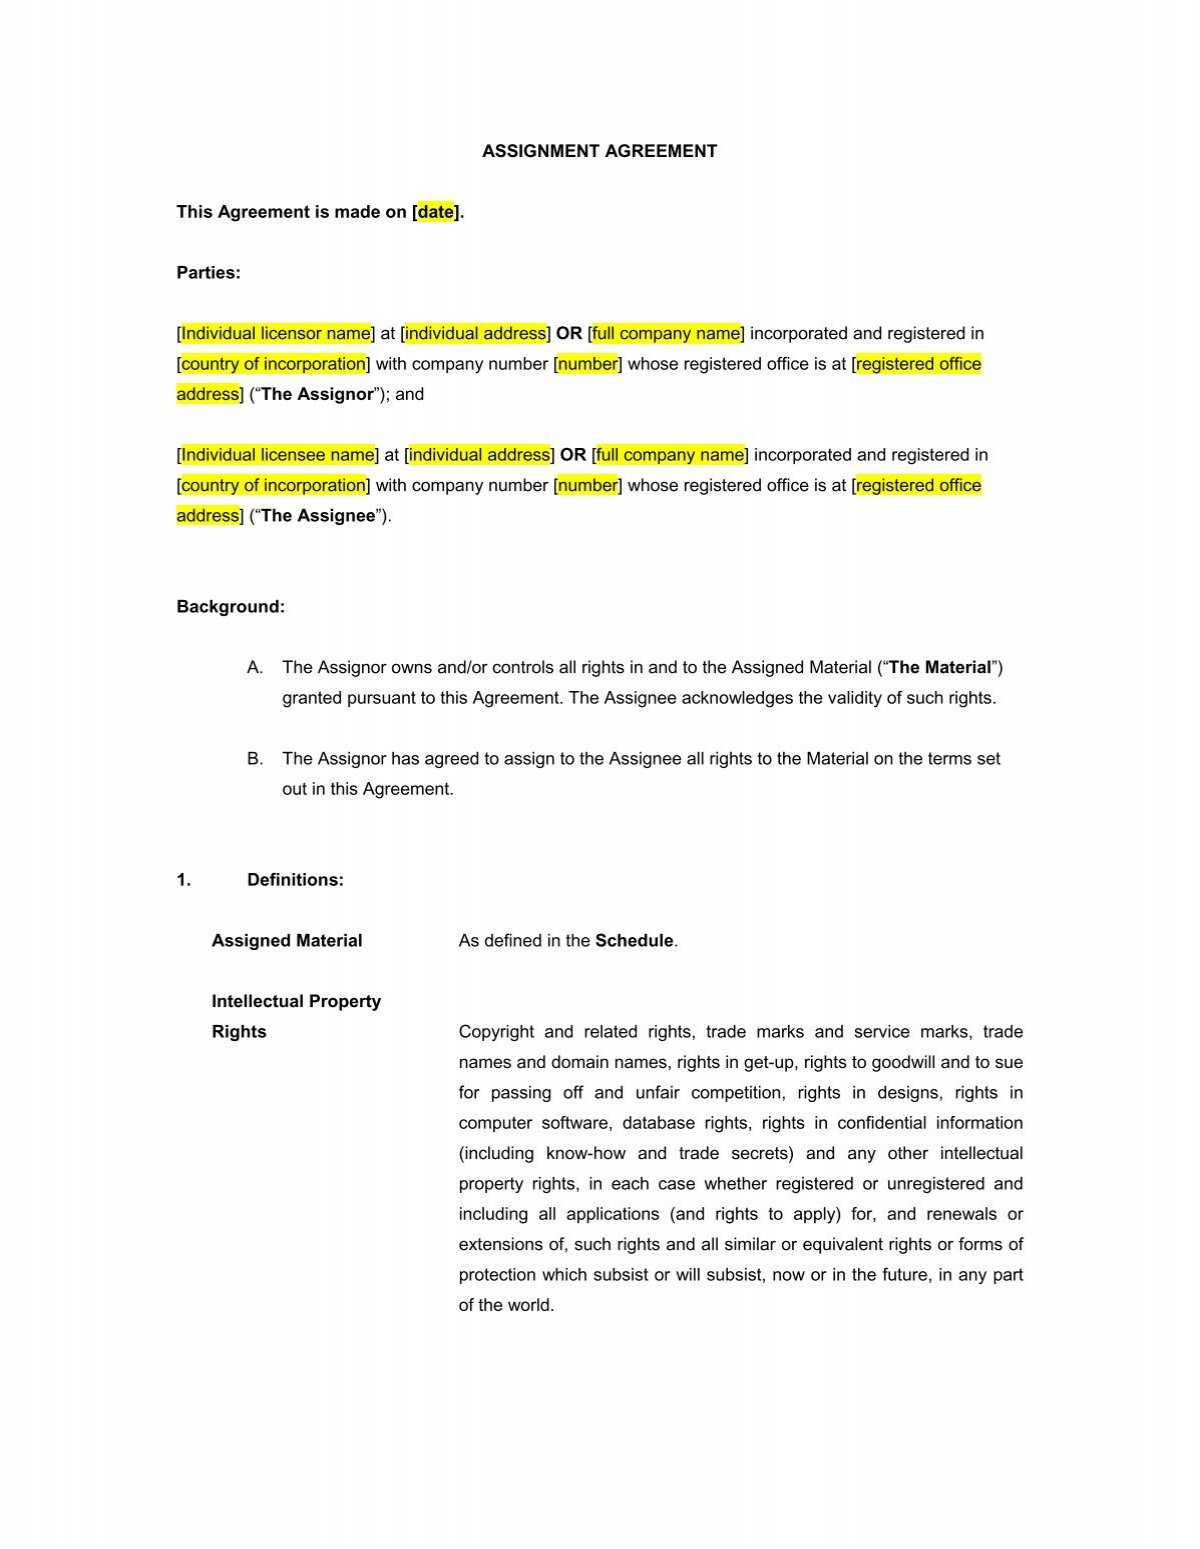 assignment agreement co to znaczy